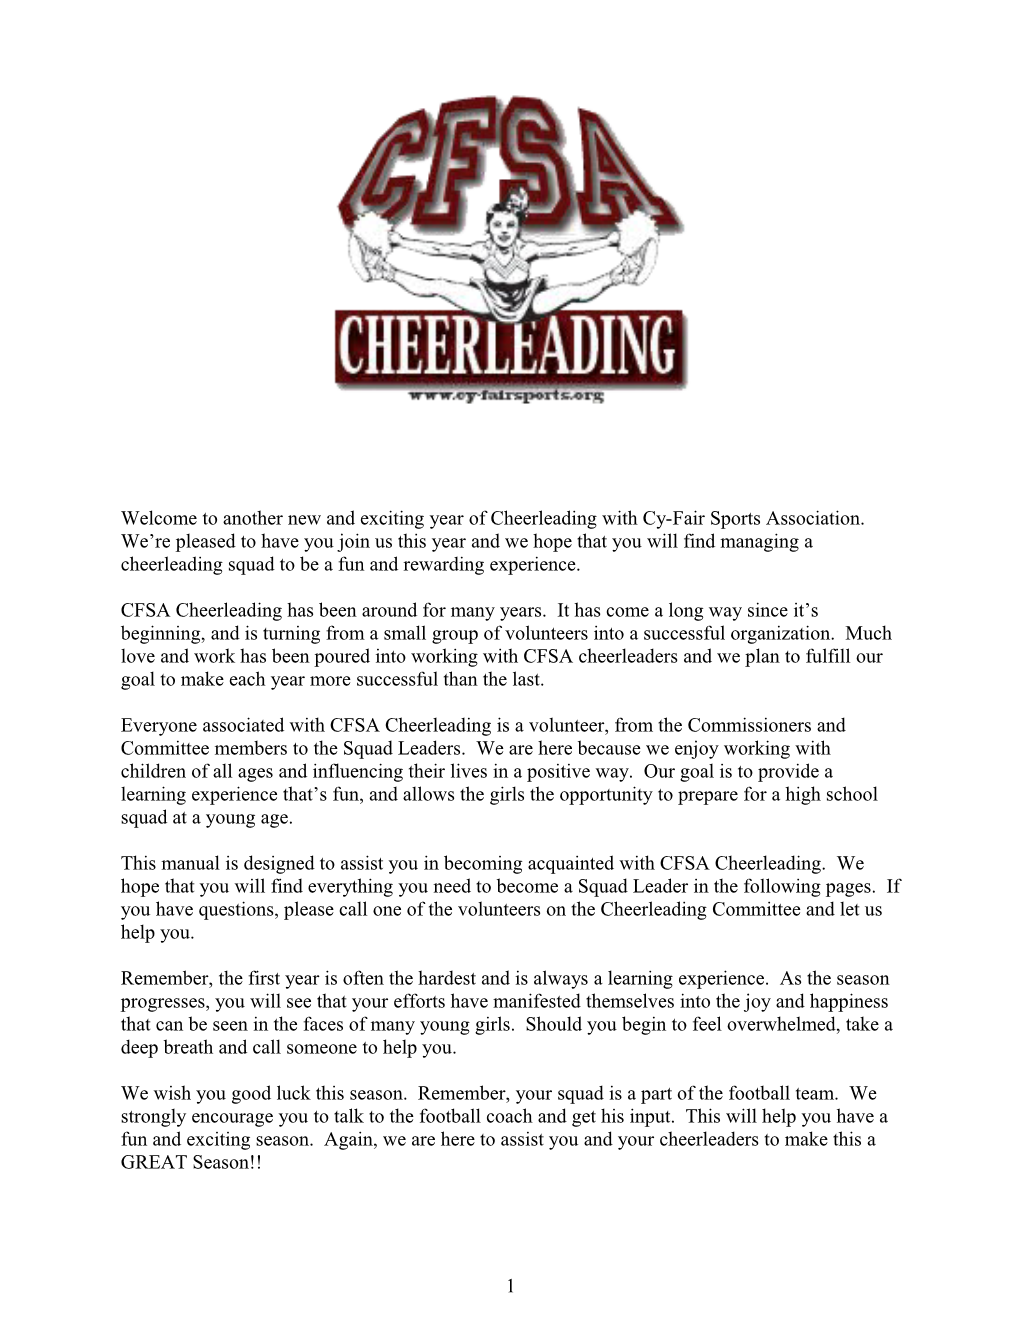 Welcome to Another New and Exciting Year of Cheerleading with Cy-Fair Sports Association